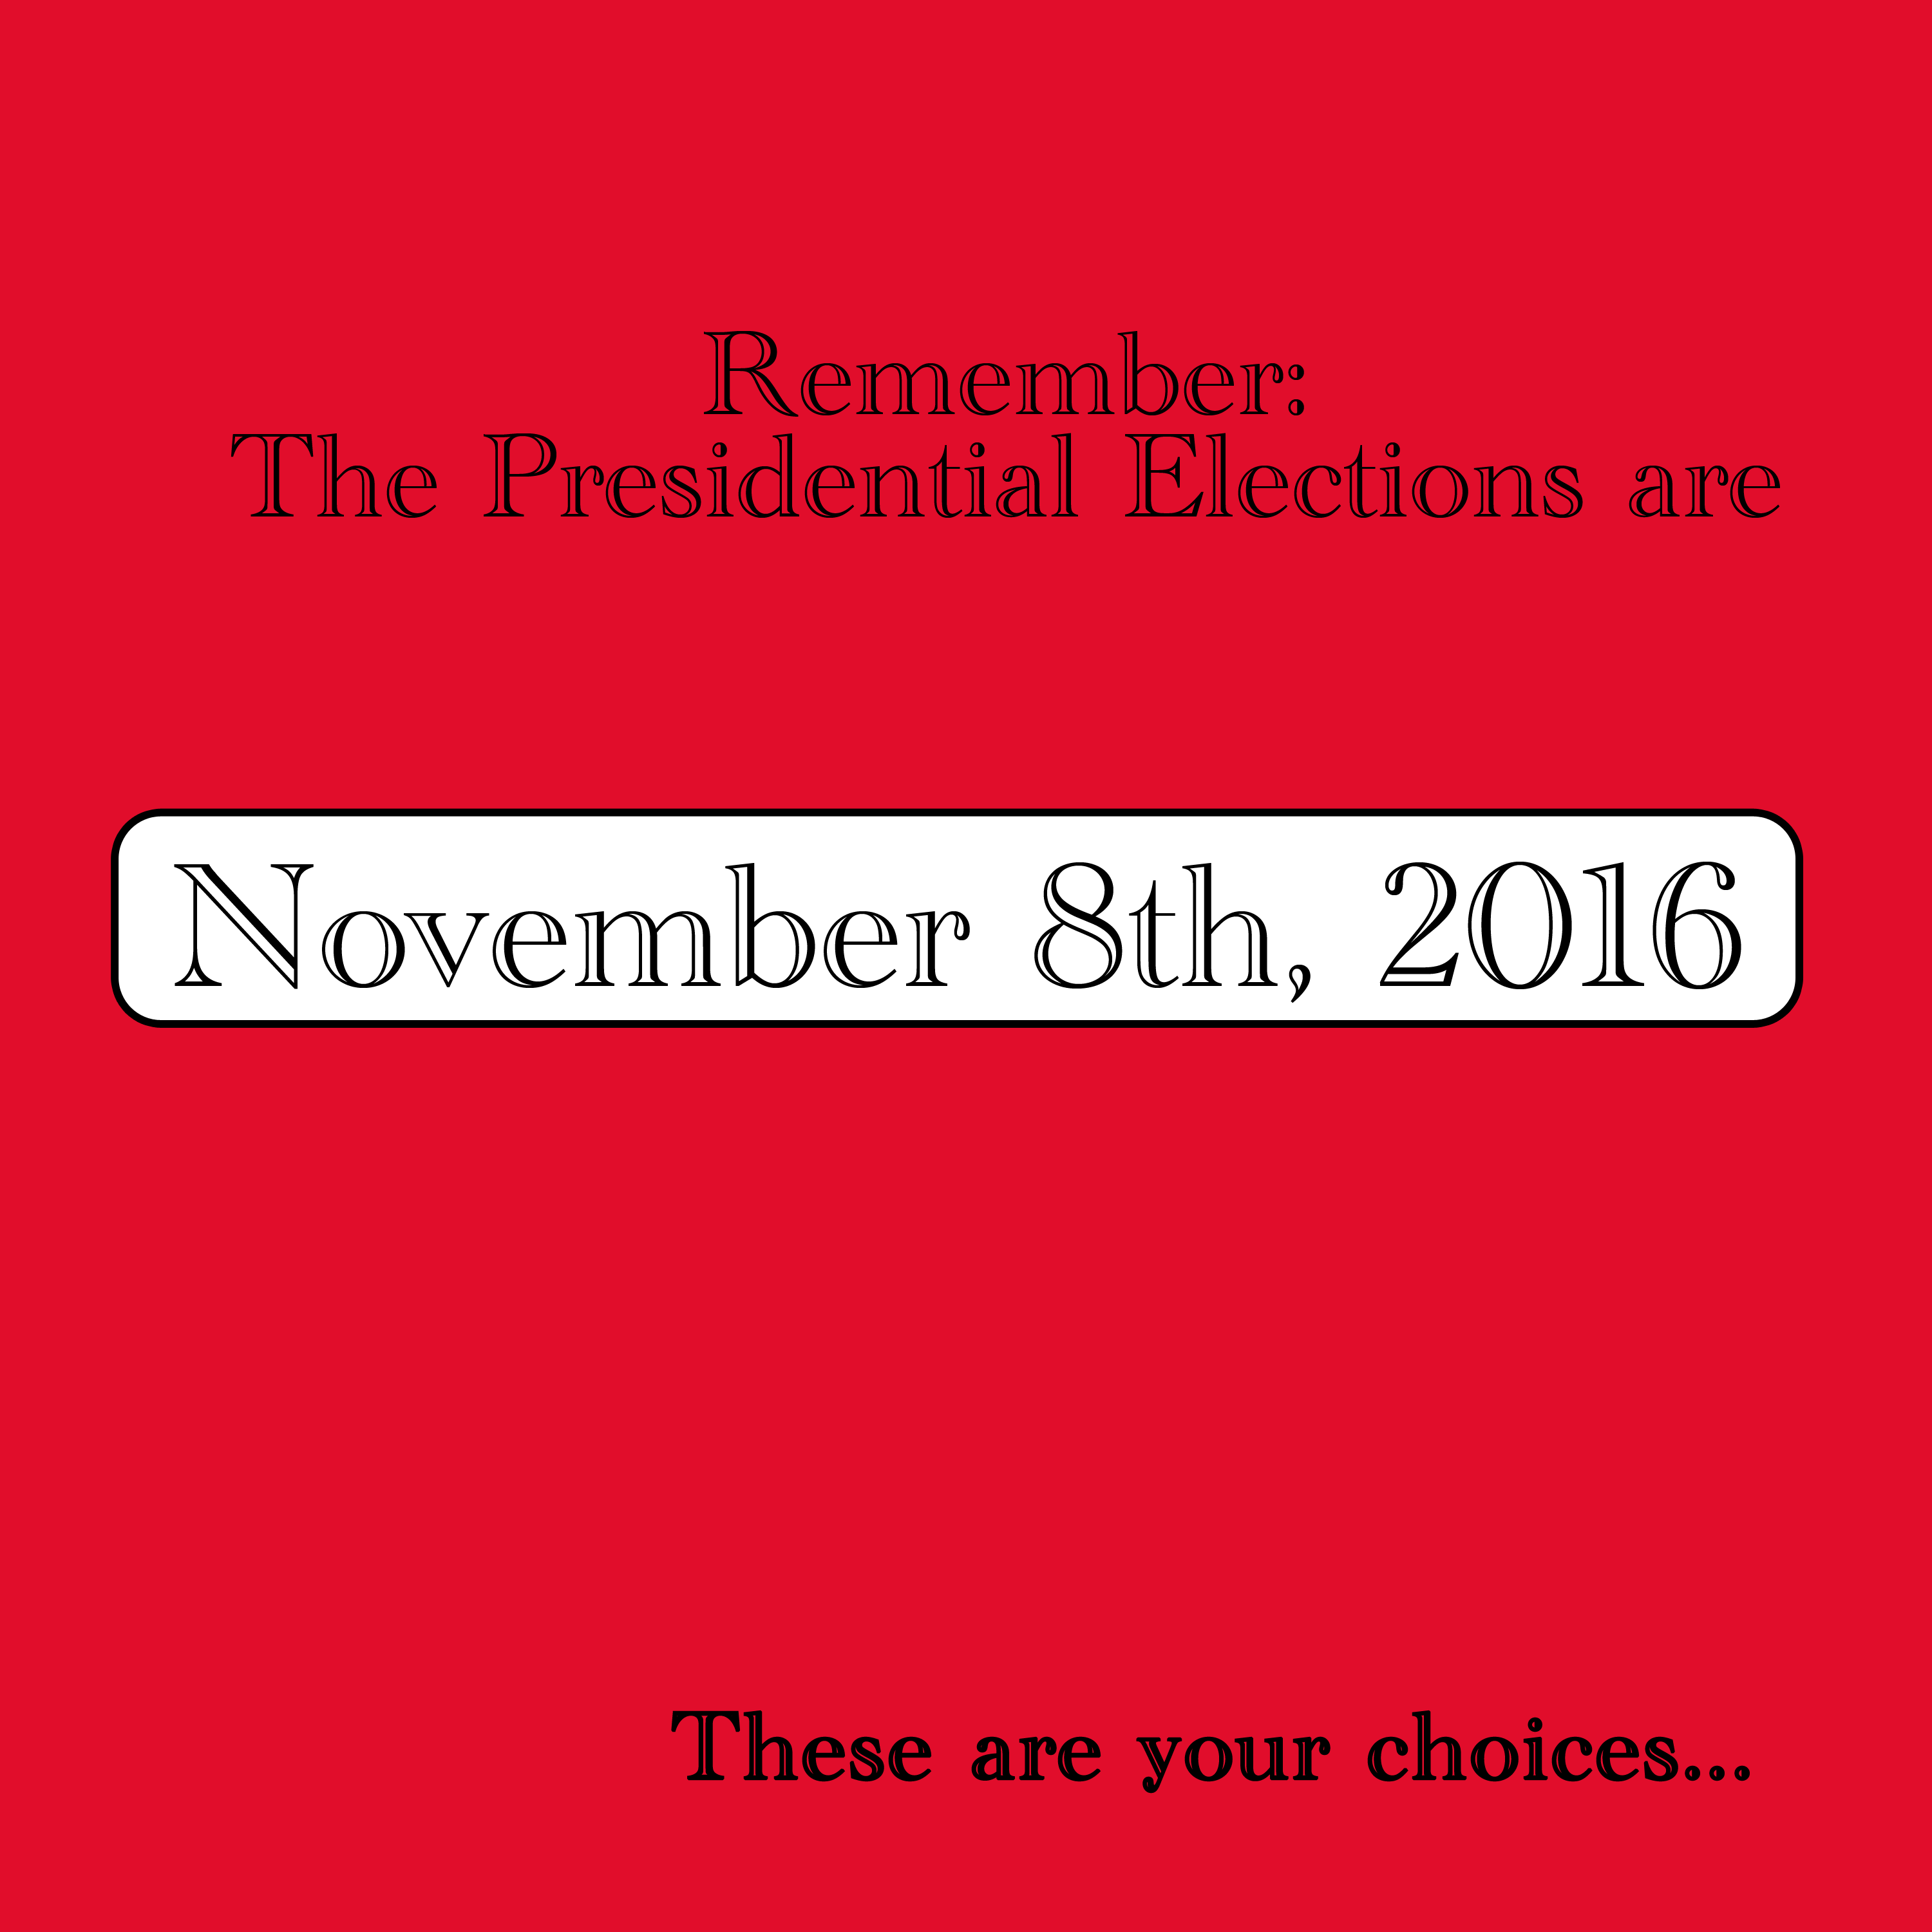 Your choices for 2016 Elections